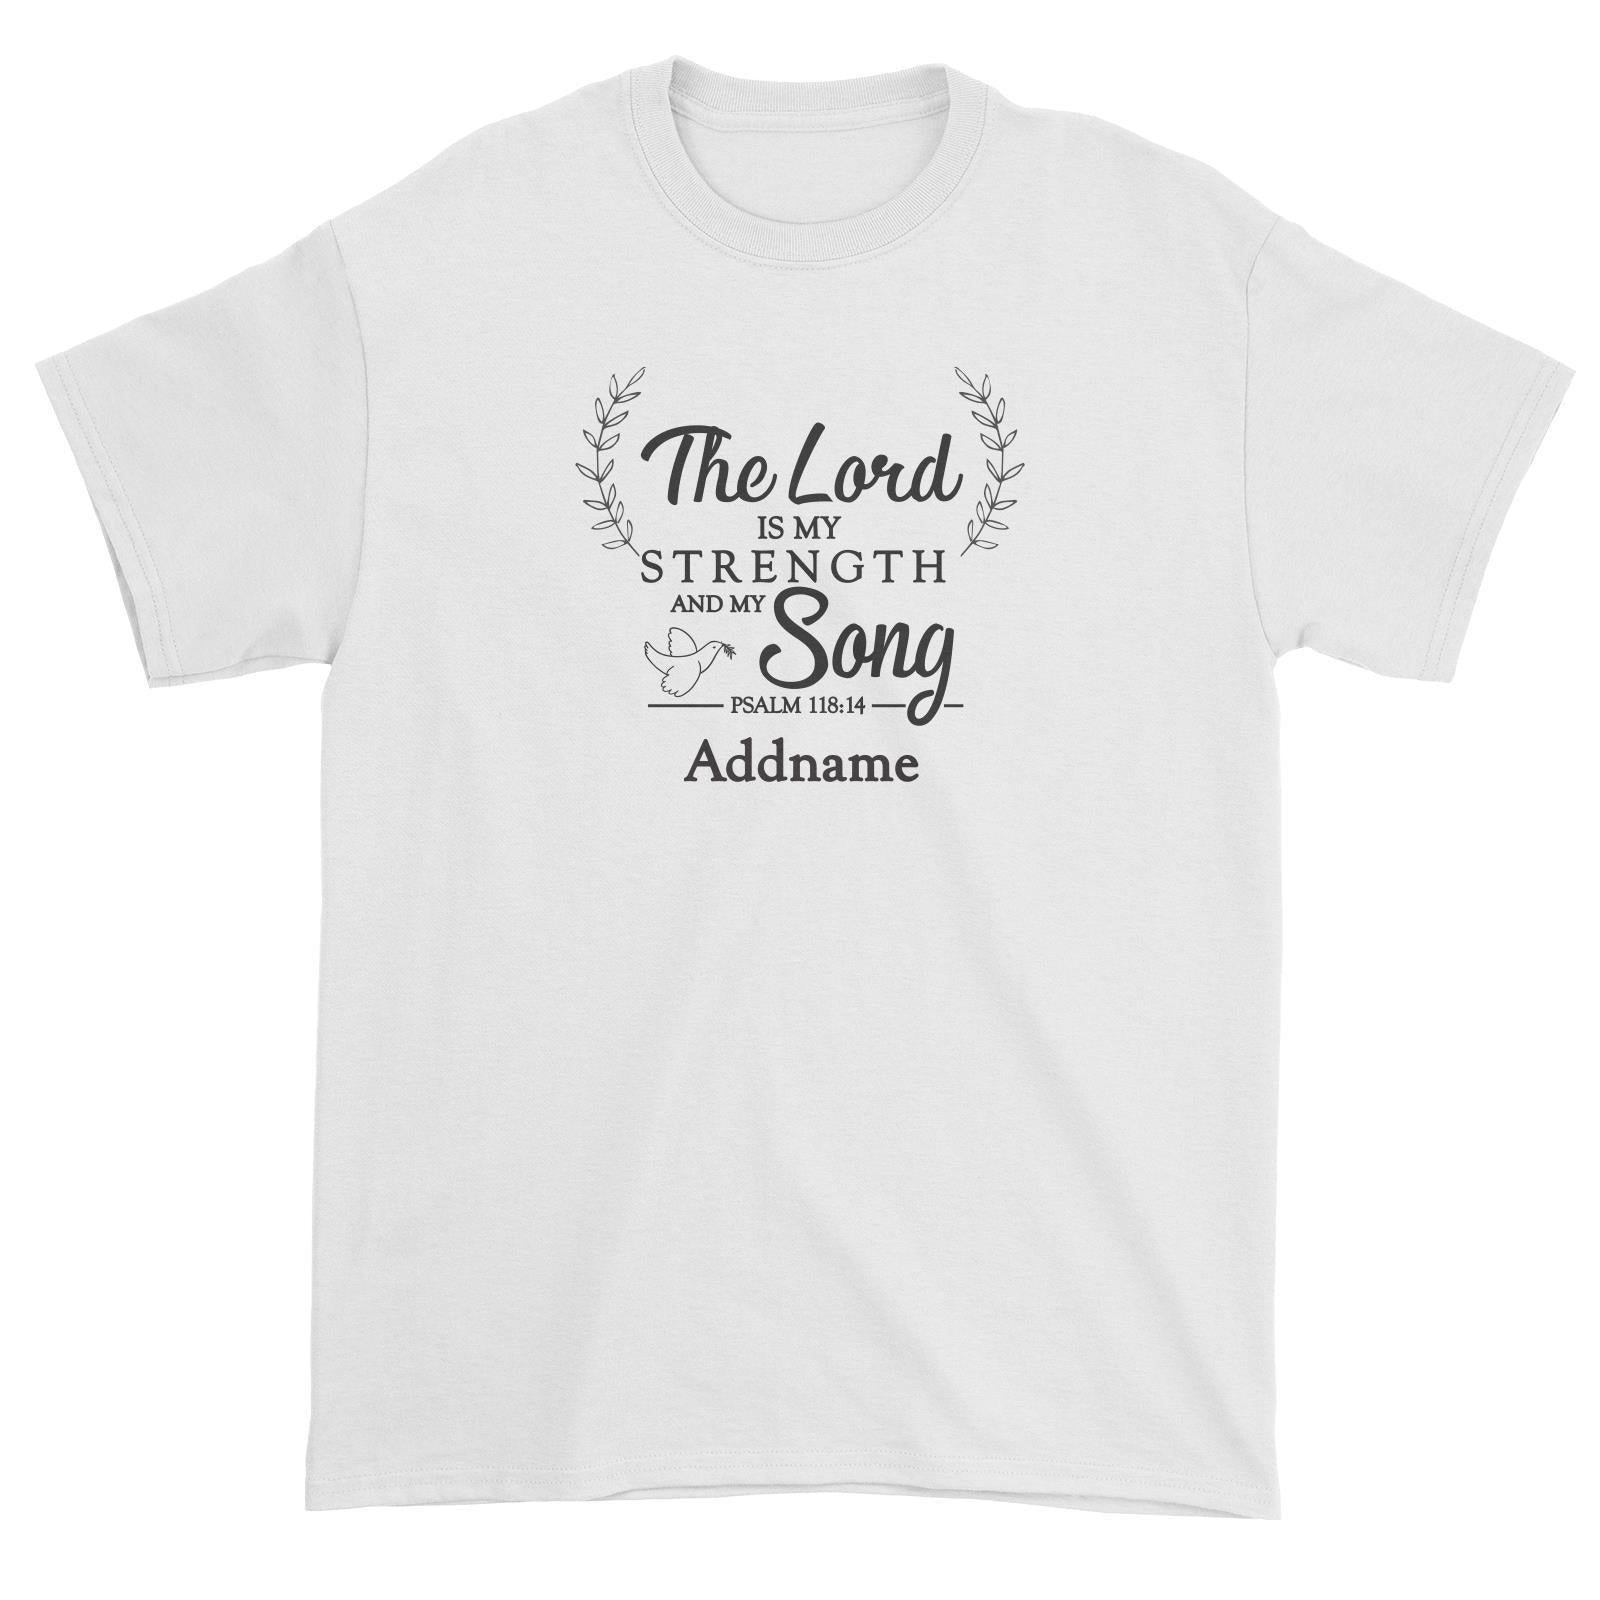 Christian Series The Lord Is My Strength Song Psalm 118.14 Addname Unisex T-Shirt